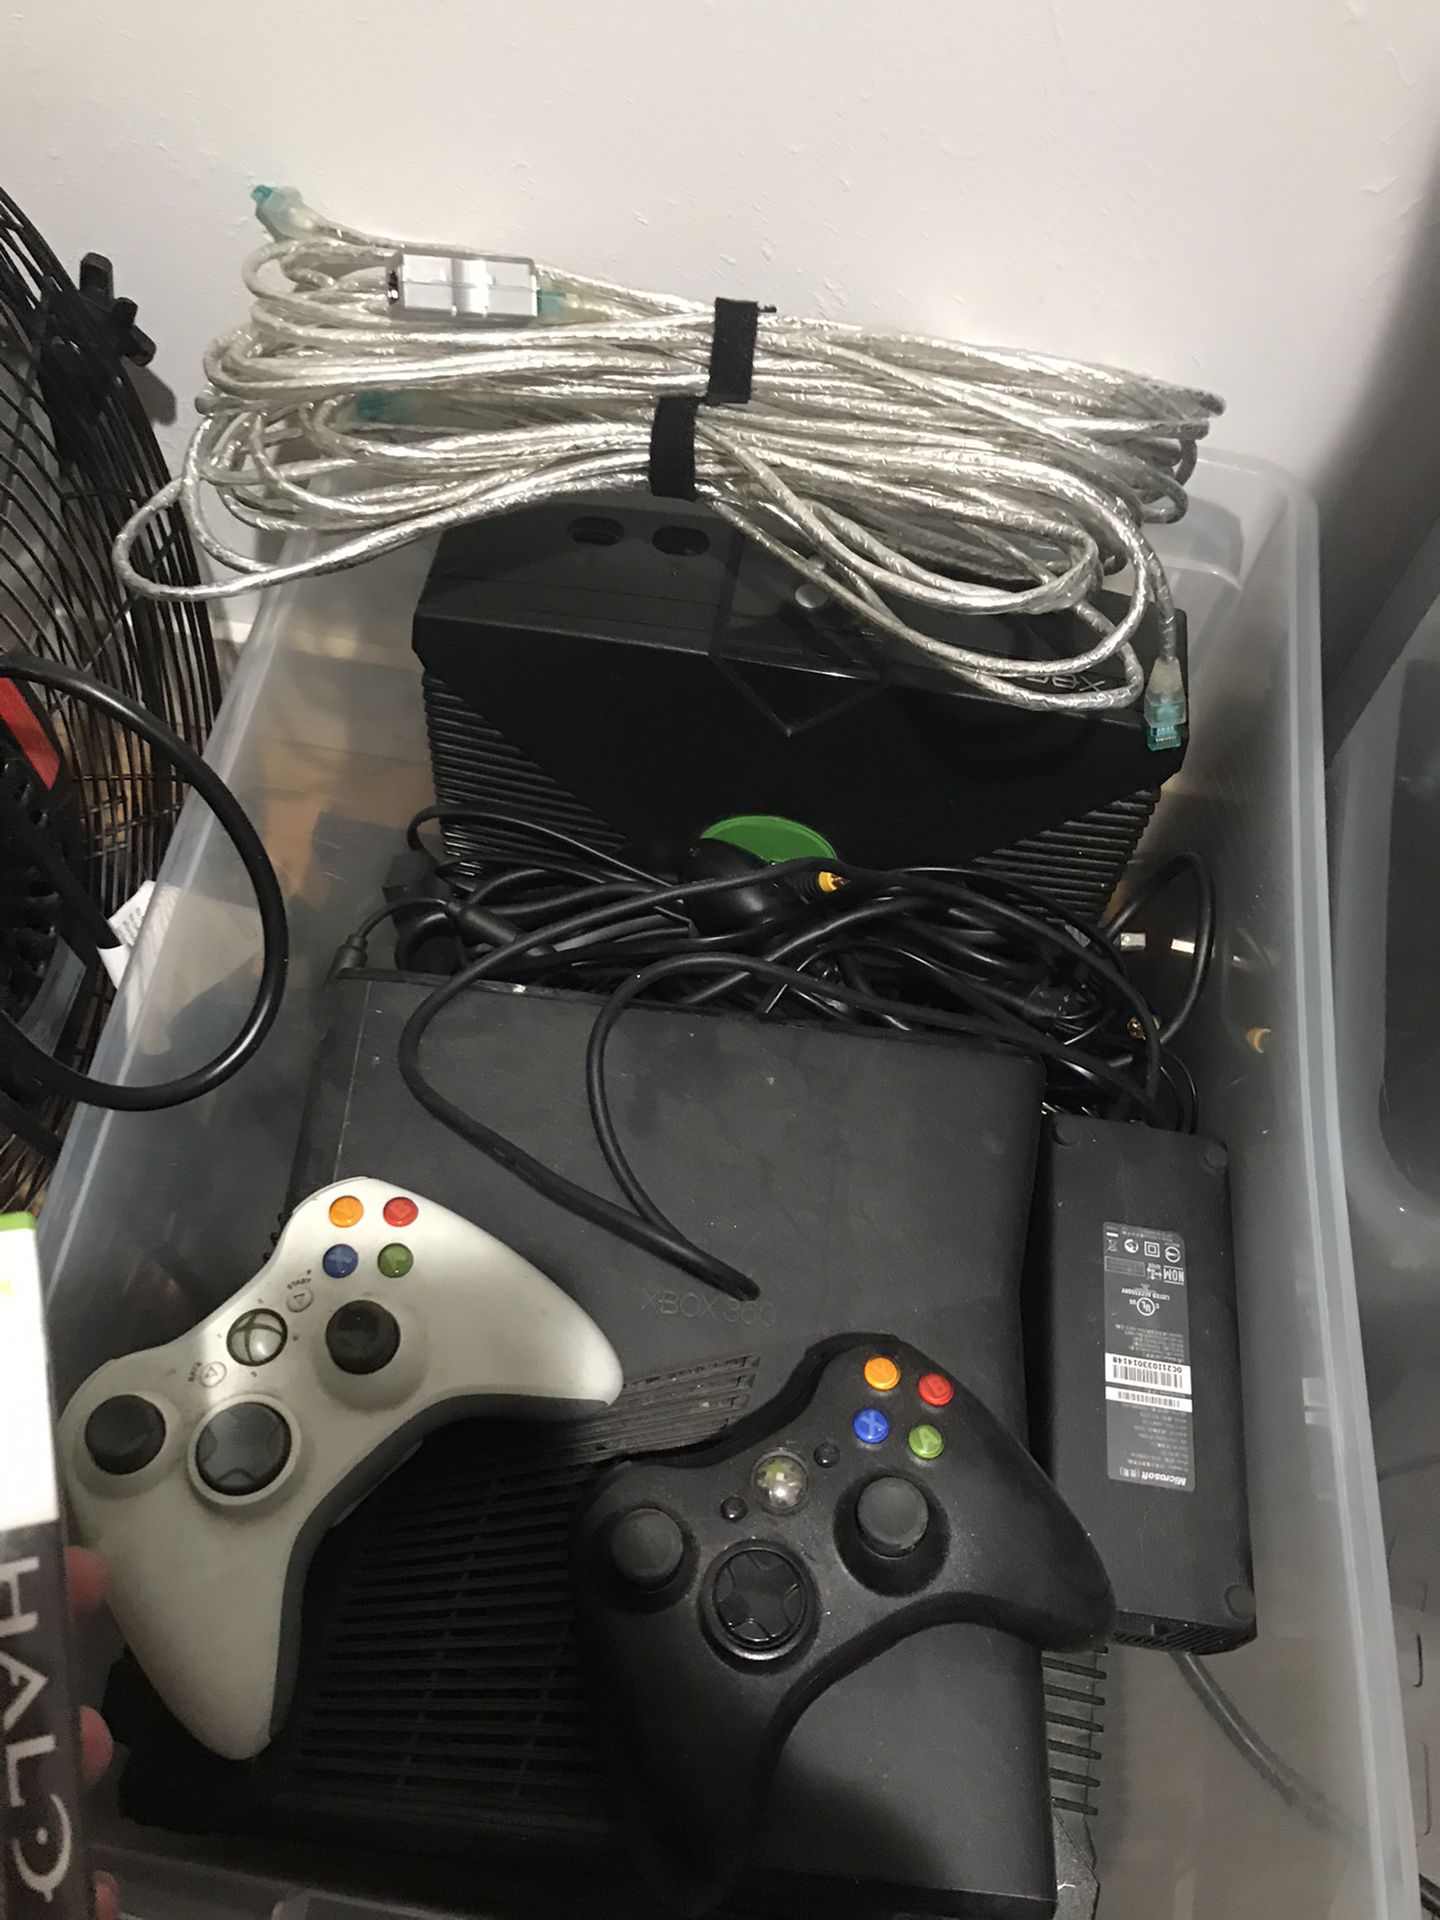 Xbox 360, Xbox’s, controllers and games